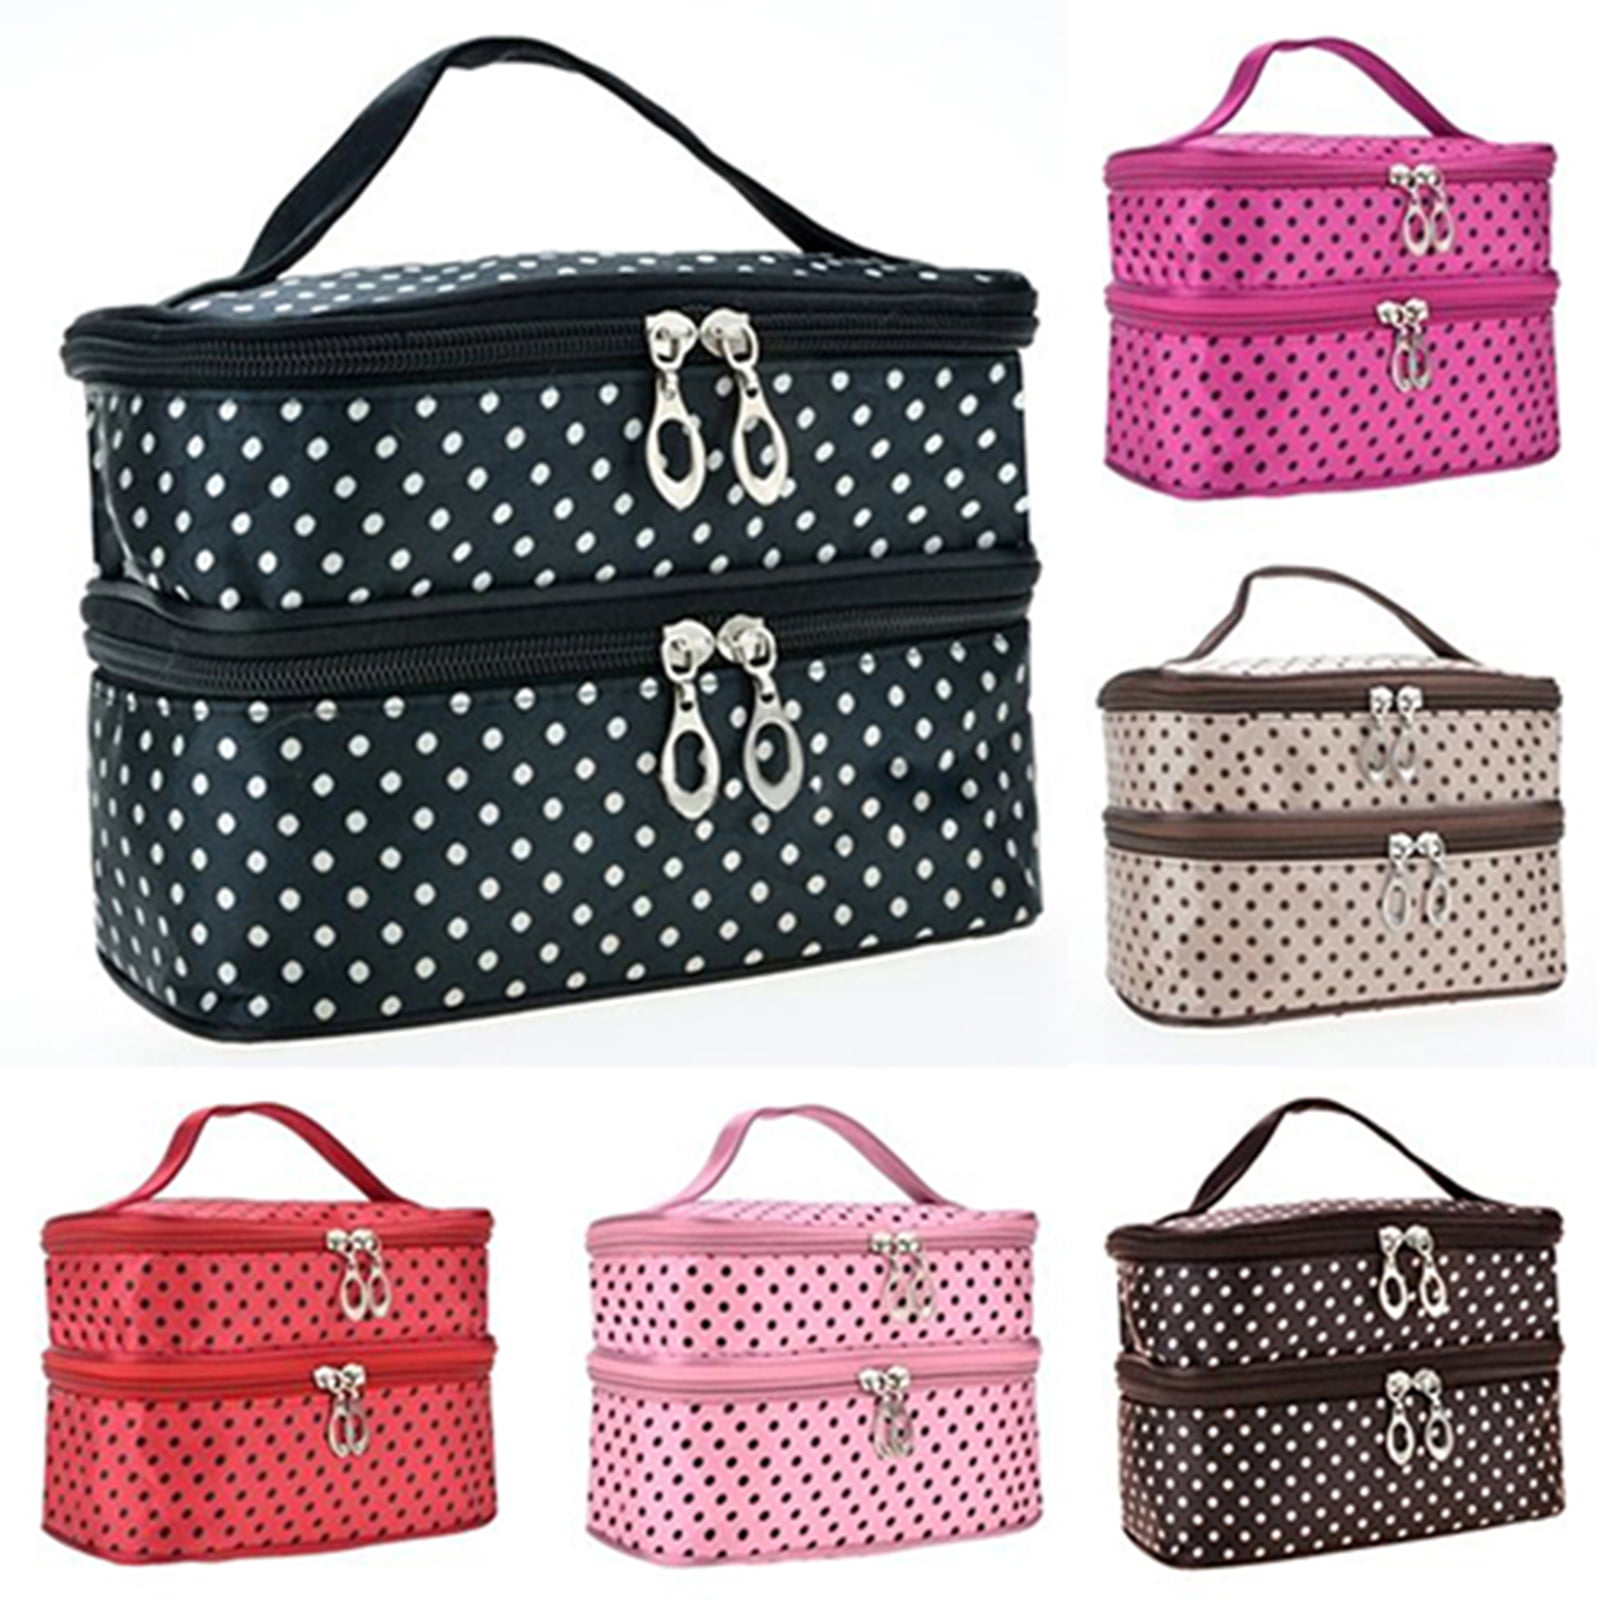 Yesbay Women Large Cosmetic Makeup Bag Case Travel Double-Deck